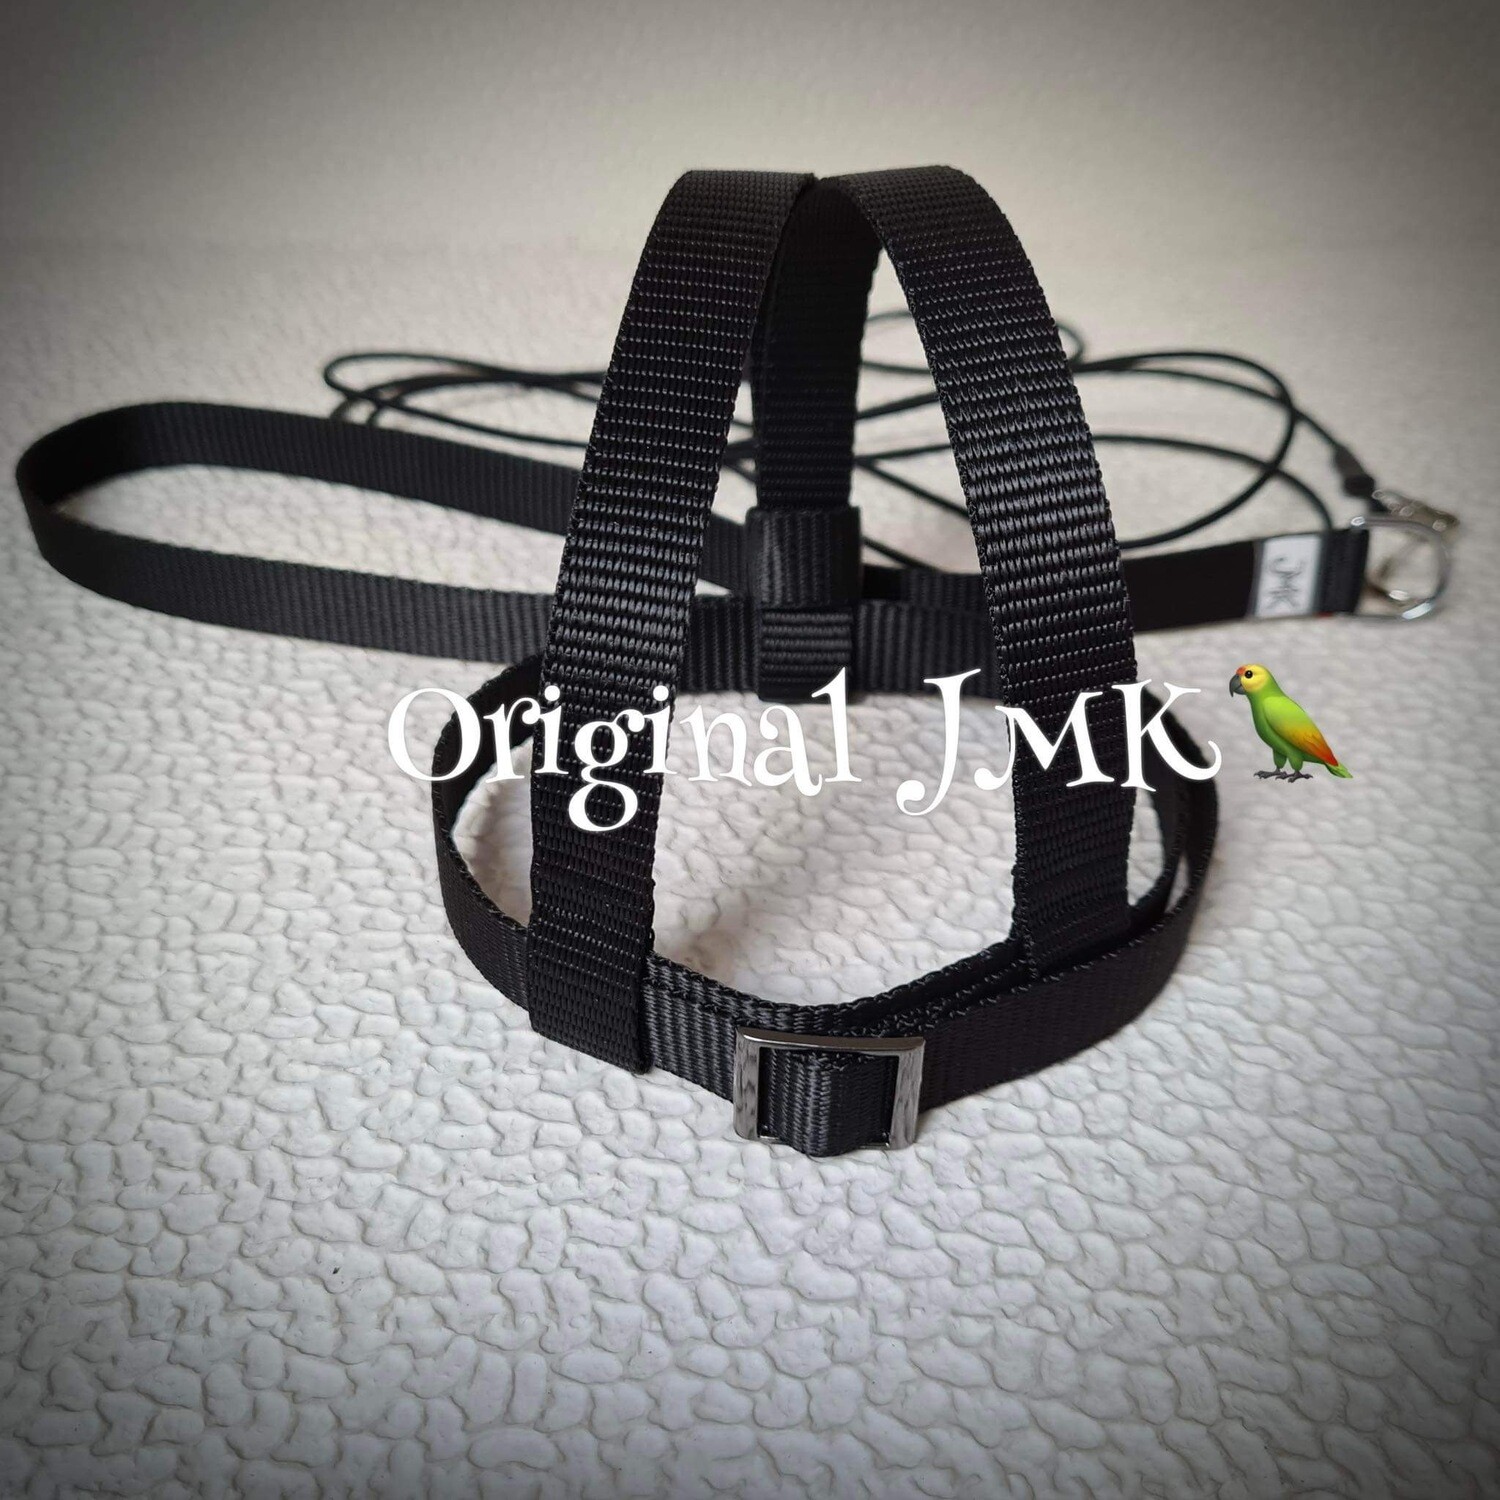 JMK Harness and Leash - Color Black, Size X-Large: 1100+ grams: Lg Moluccan, Green Winged Macaw, Hyacinth Macaw, Buffons